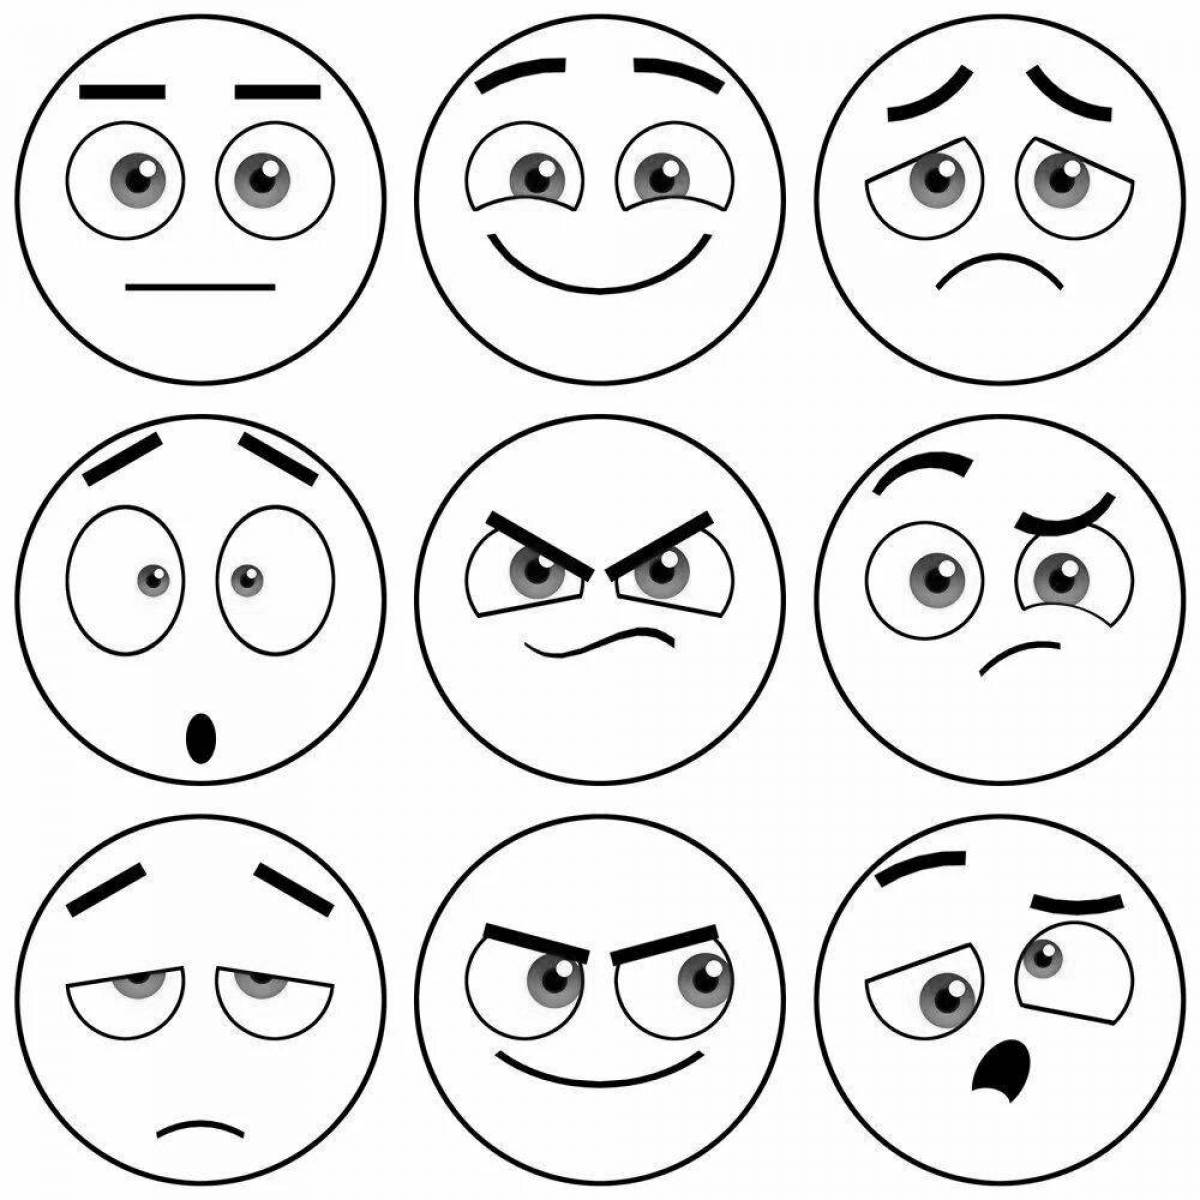 Coloring page of a funny emoji